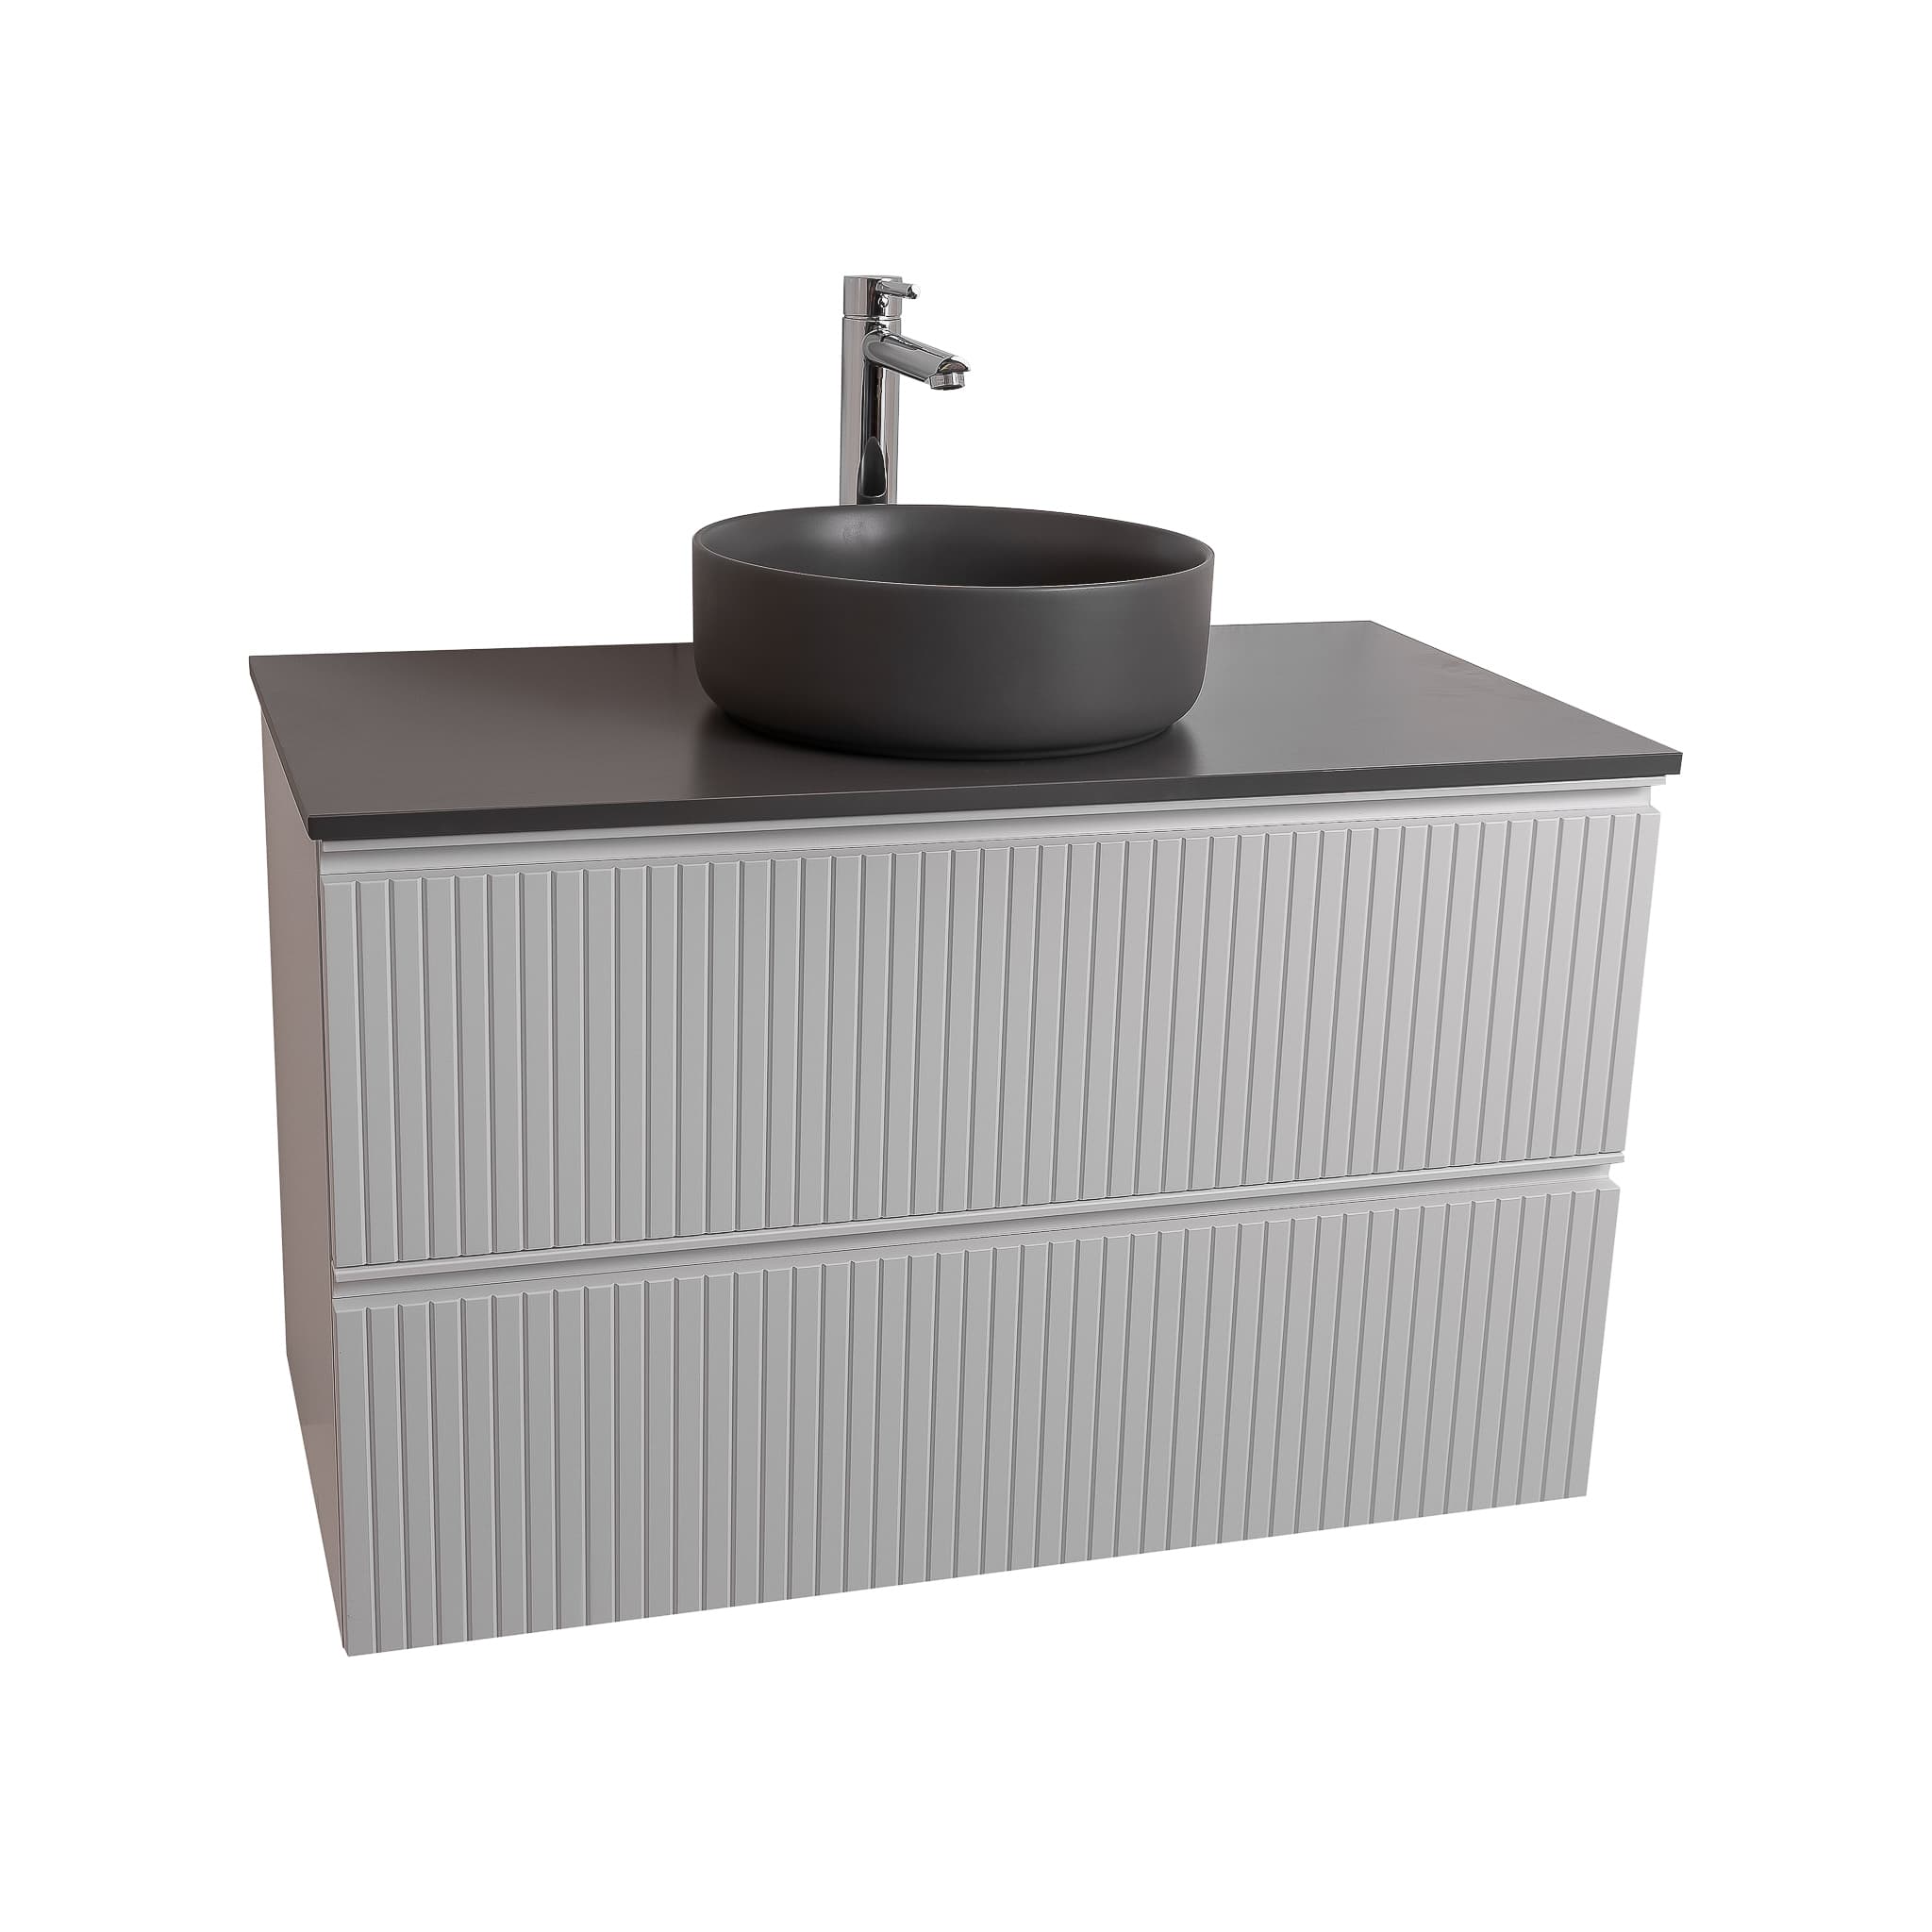 Ares 39.5 Matte White Cabinet, Ares Grey Ceniza Top And Ares Grey Ceniza Ceramic Basin, Wall Mounted Modern Vanity Set